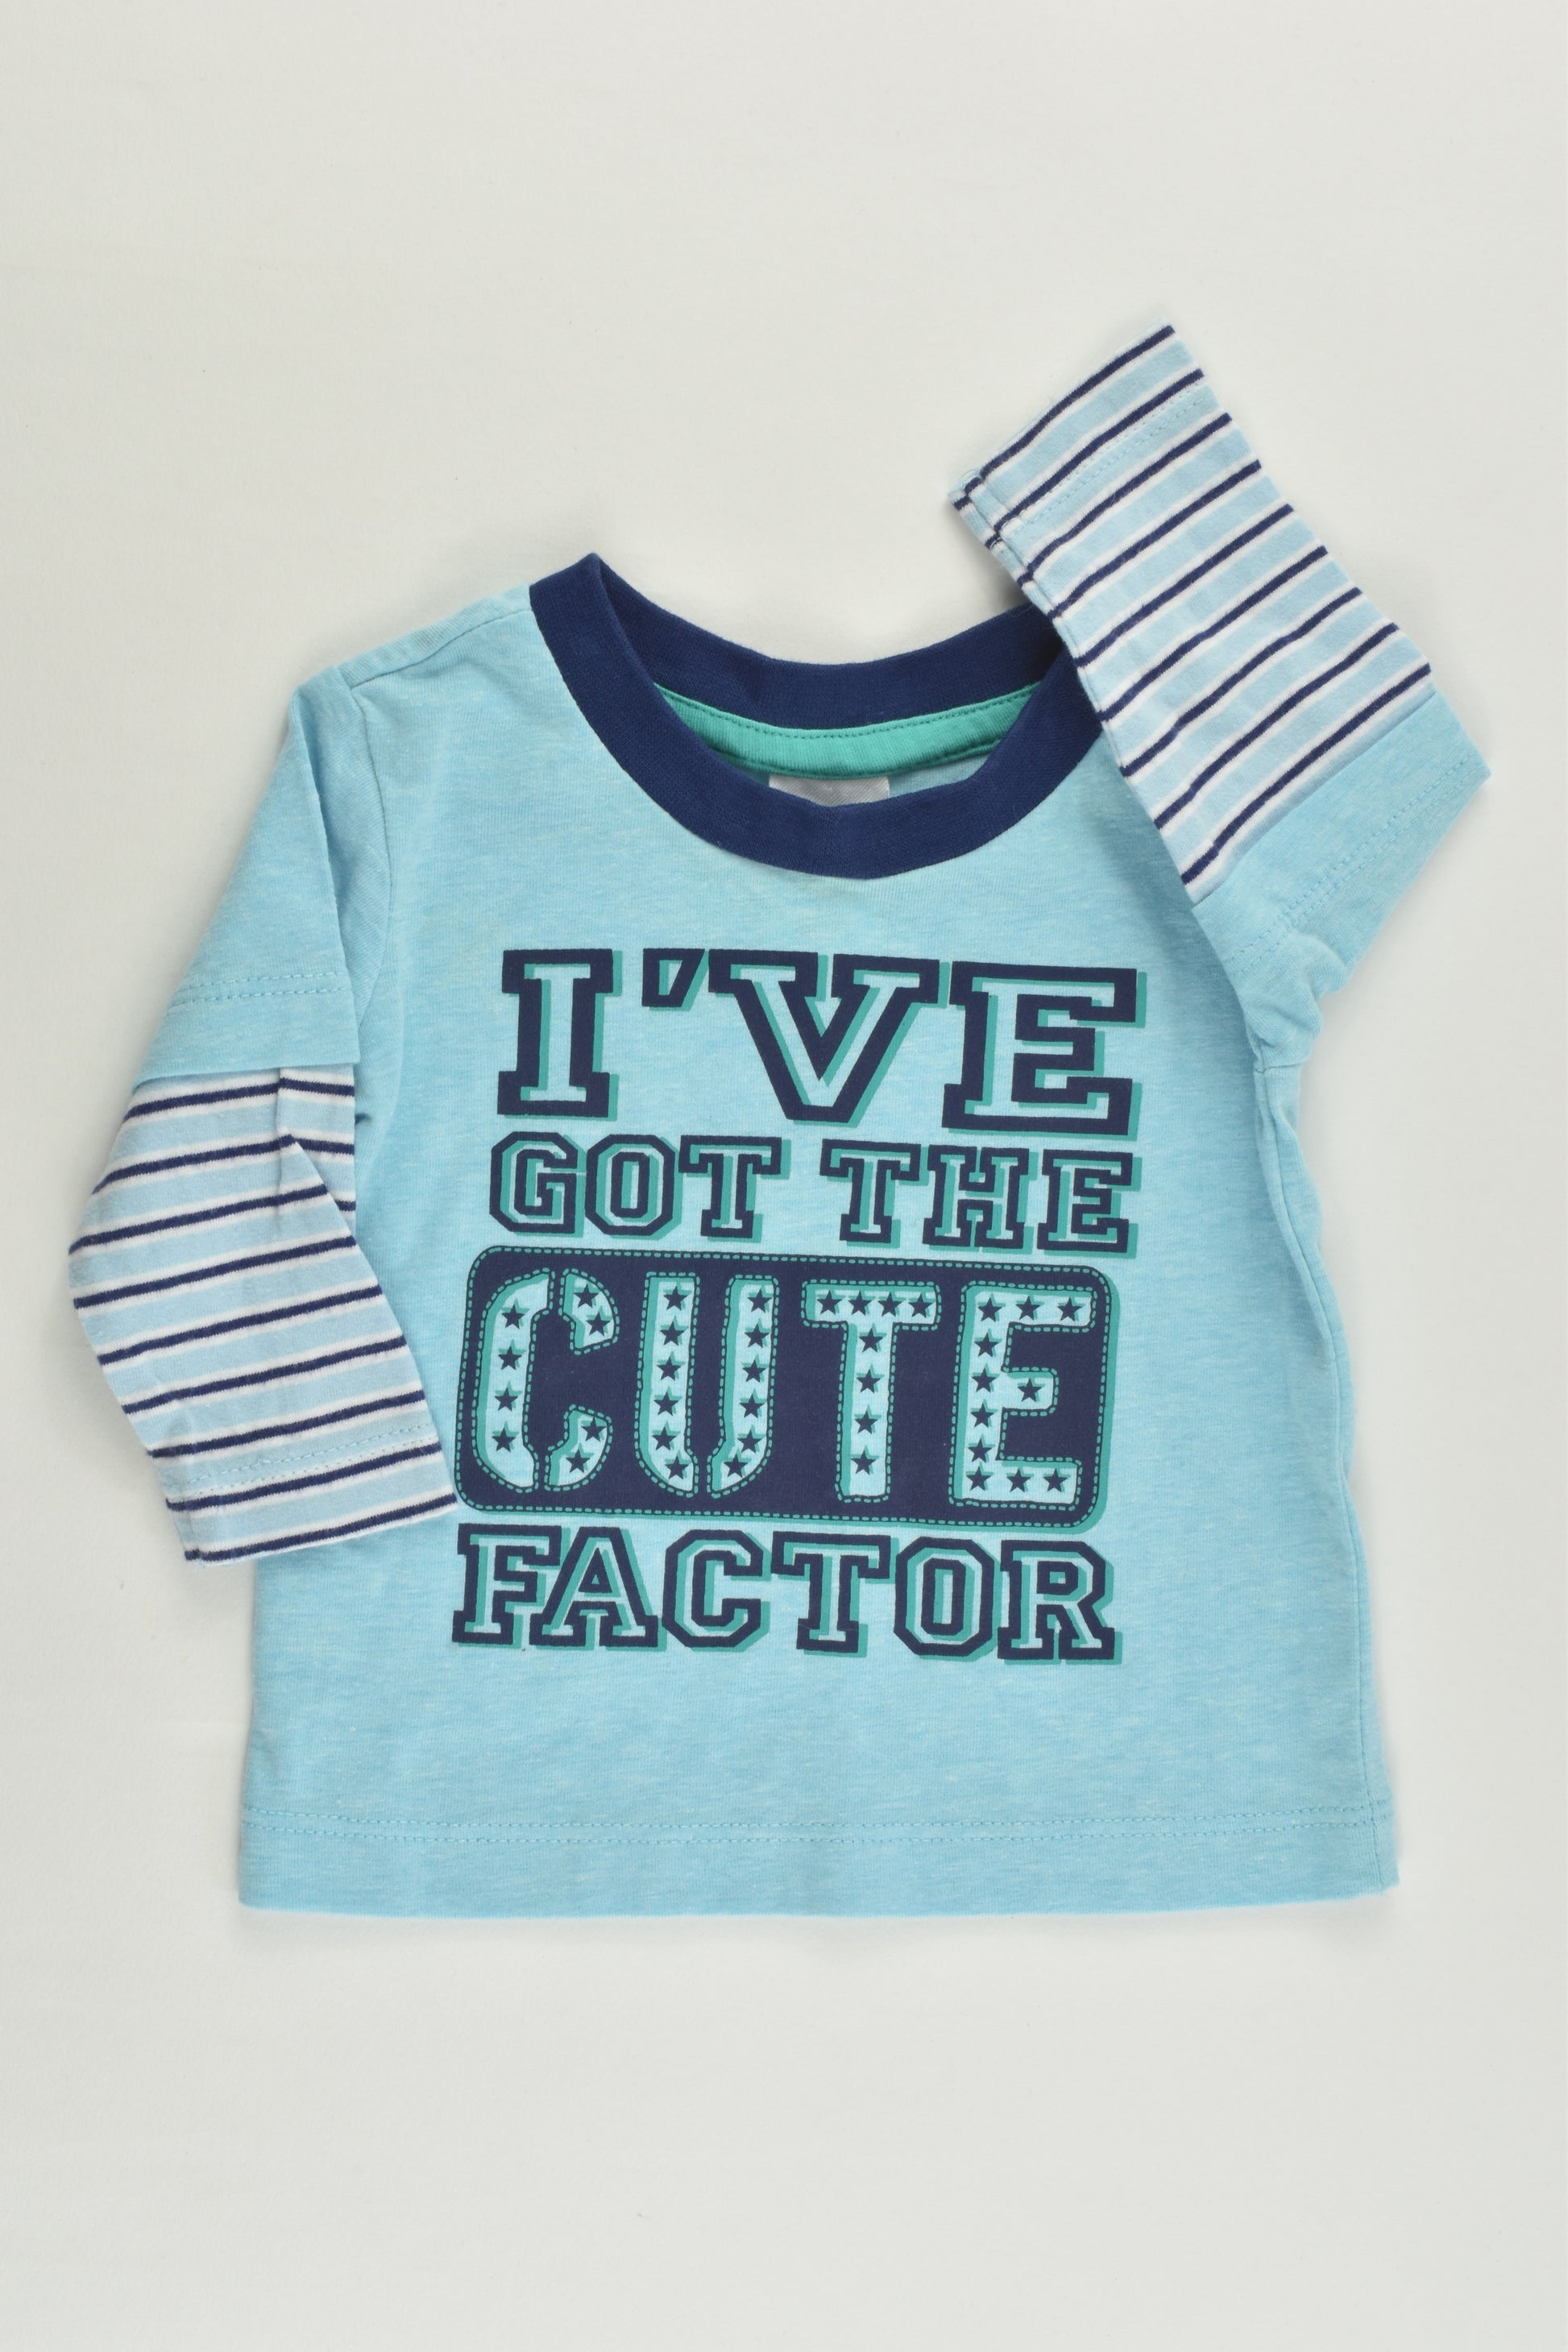 Tiny Little Wonders Size 000 (0-3 months) 'I've Got The Cute Factor' Top